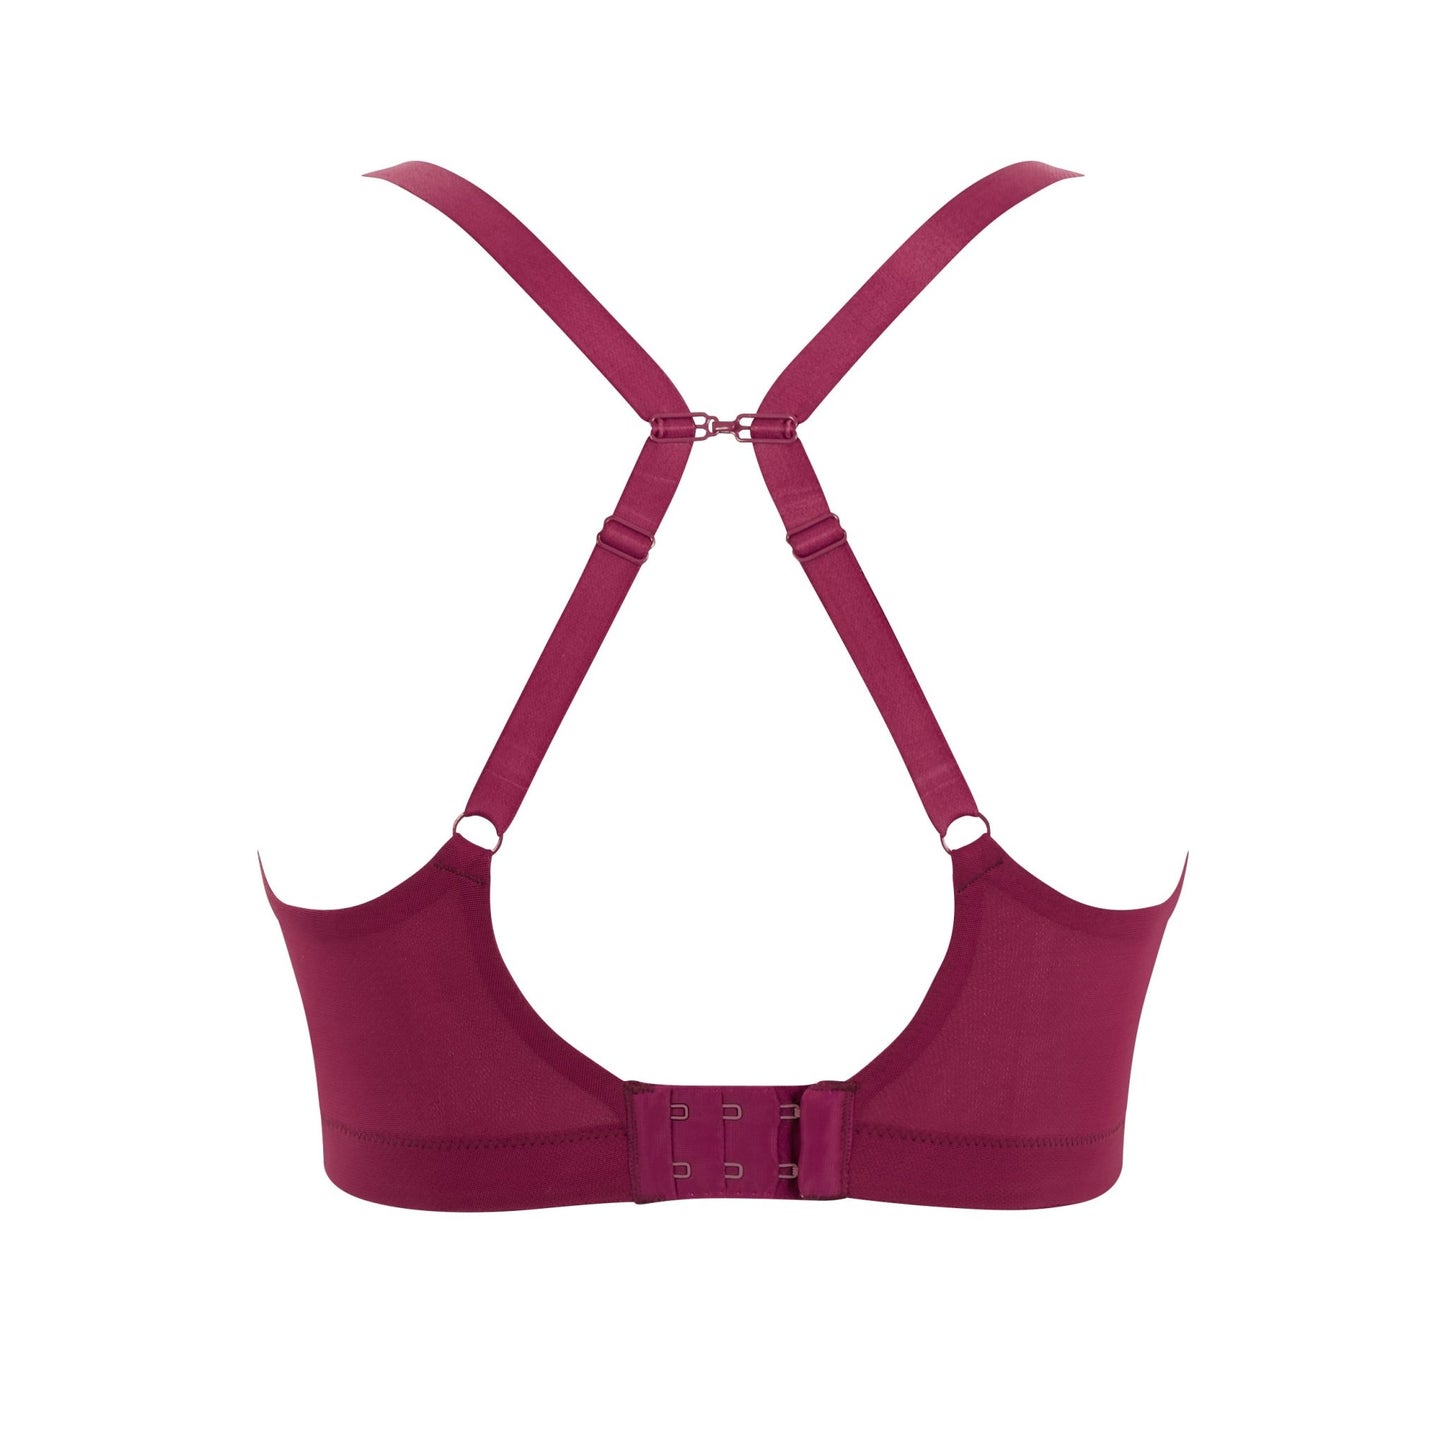 Alexis Non-Wired Bralette - Pinned Up Bra Lounge